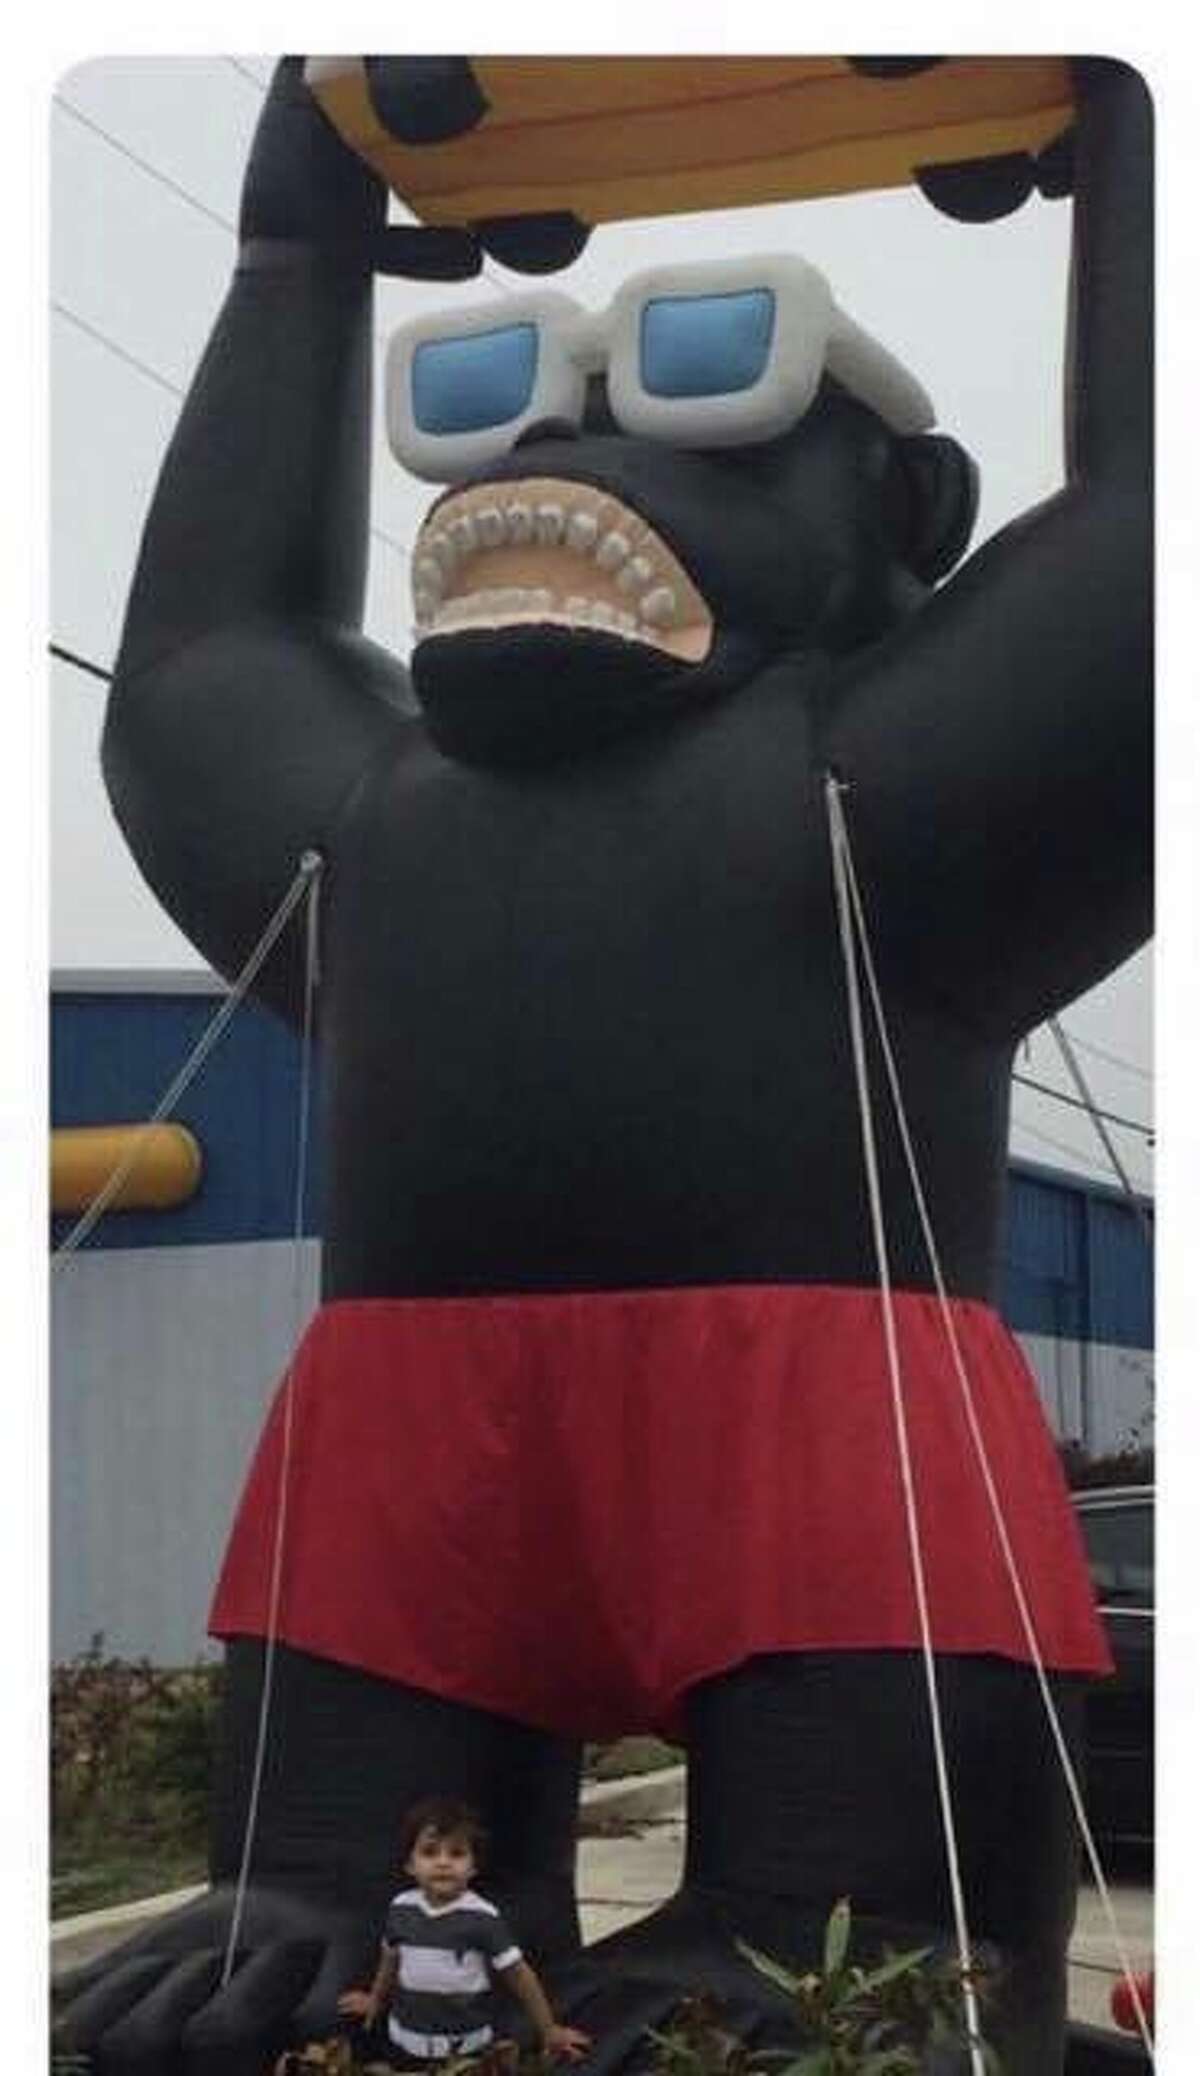 A 12-feet-tall inflatable gorilla was stolen from a Fiat dealership in Corpus Christi on Feb. 19, 2017.